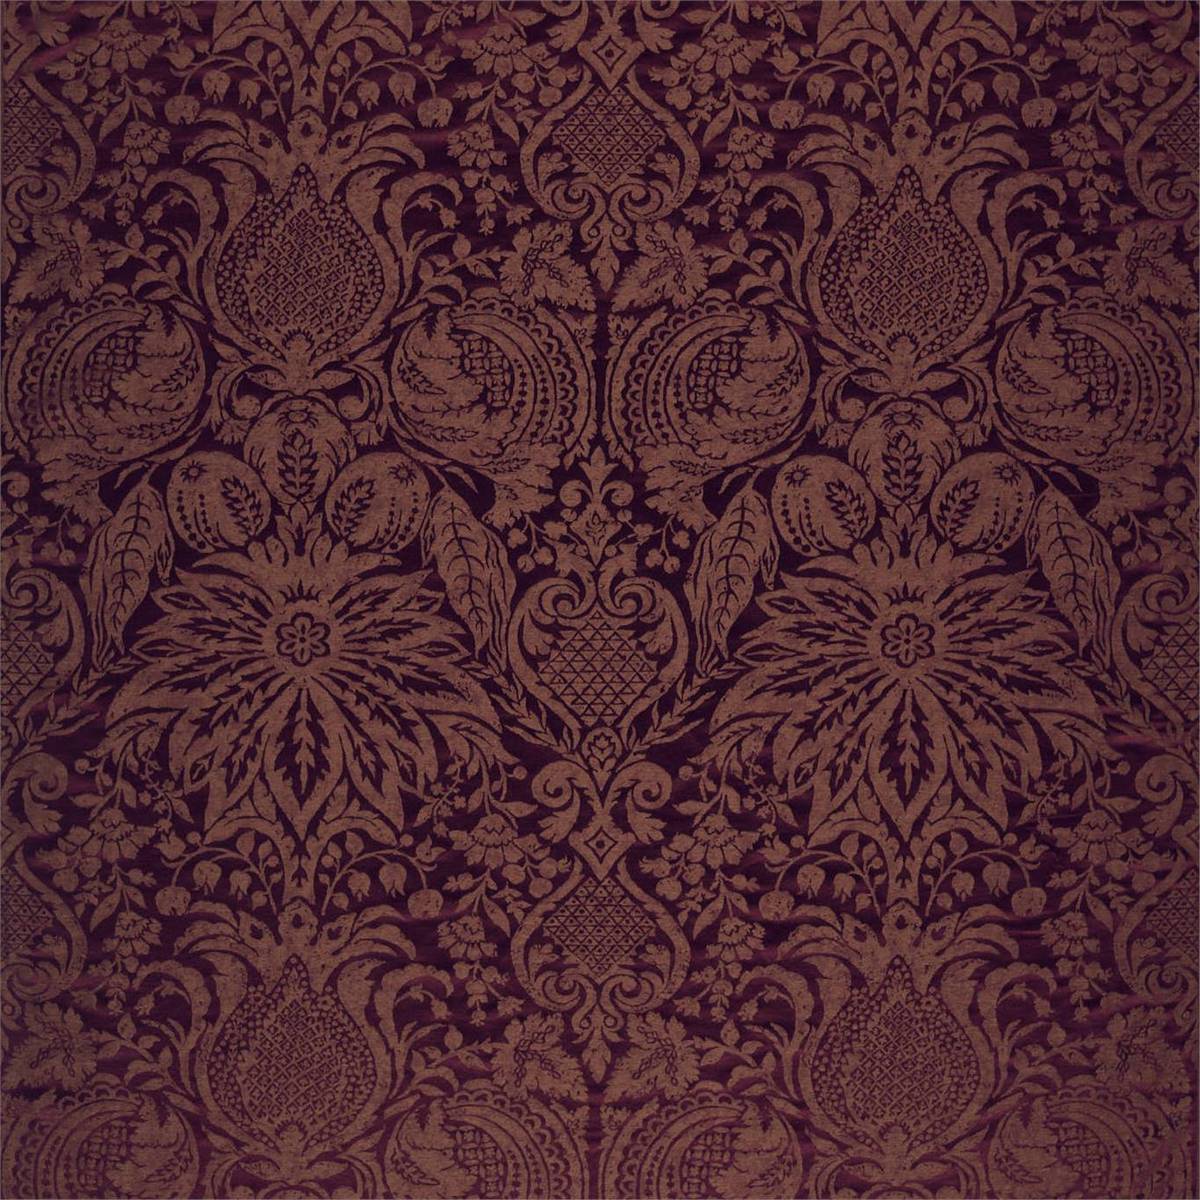 Mitford Weave Rubient Fabric by Zoffany